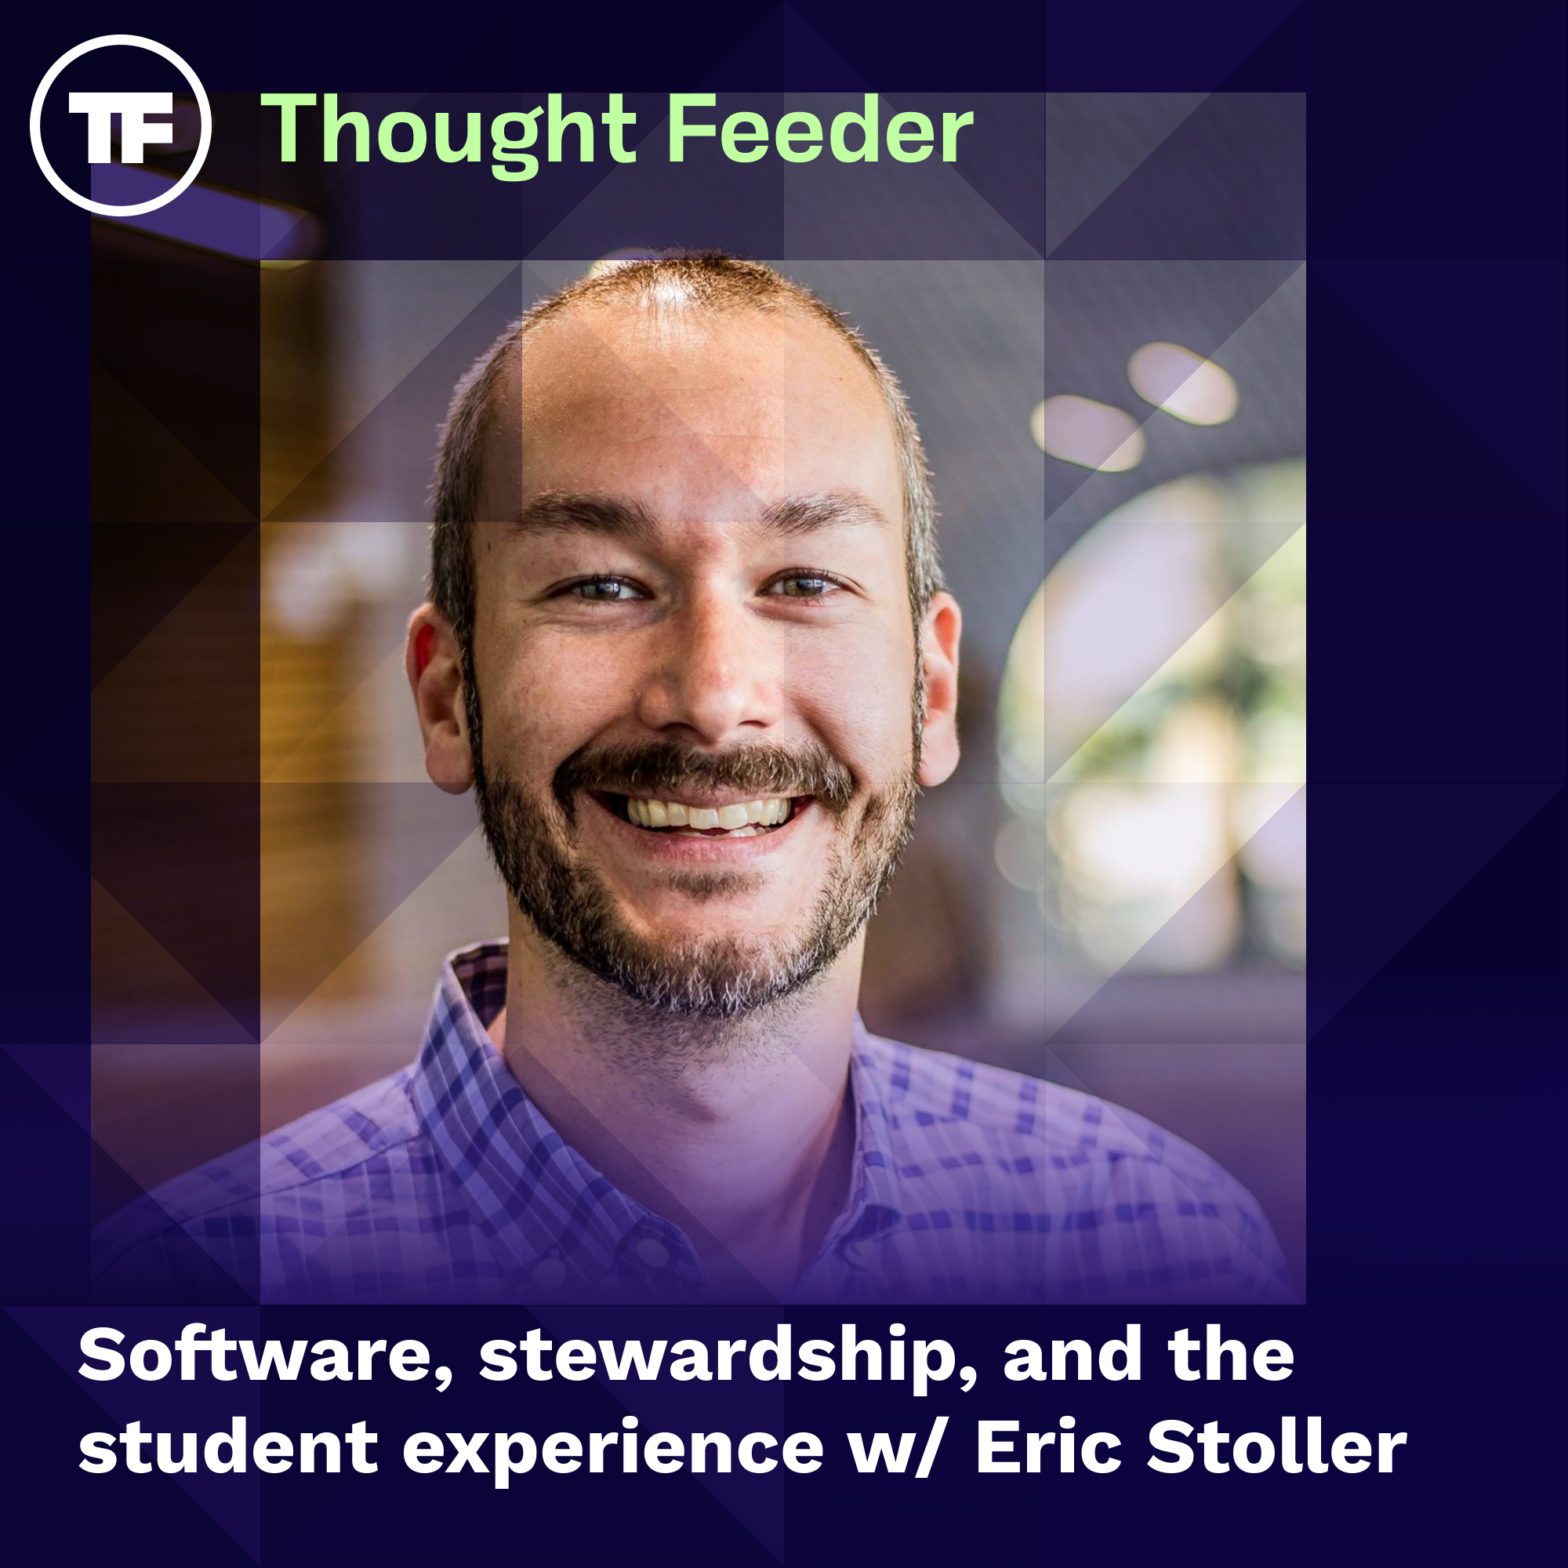 Software, stewardship, and the student experience with Eric Stoller